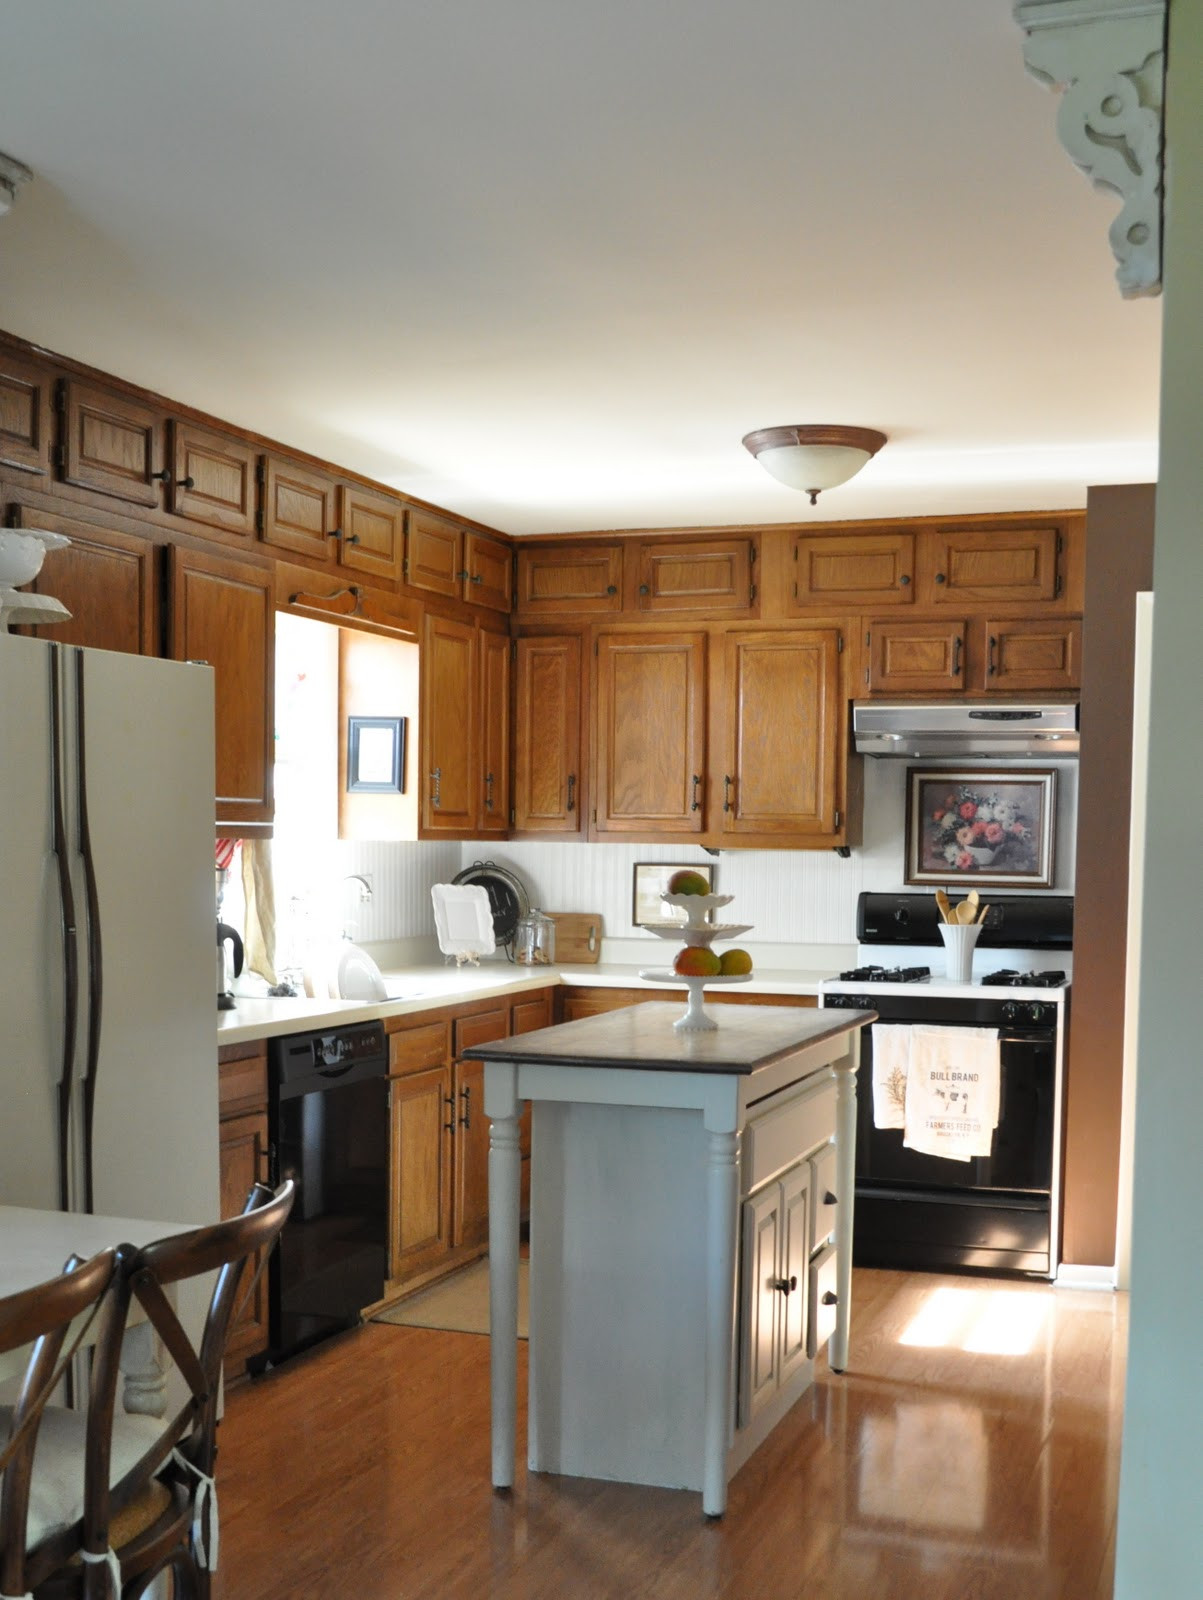 Complete Kitchen Remodeling
 My plete kitchen remodel story for about $12 000